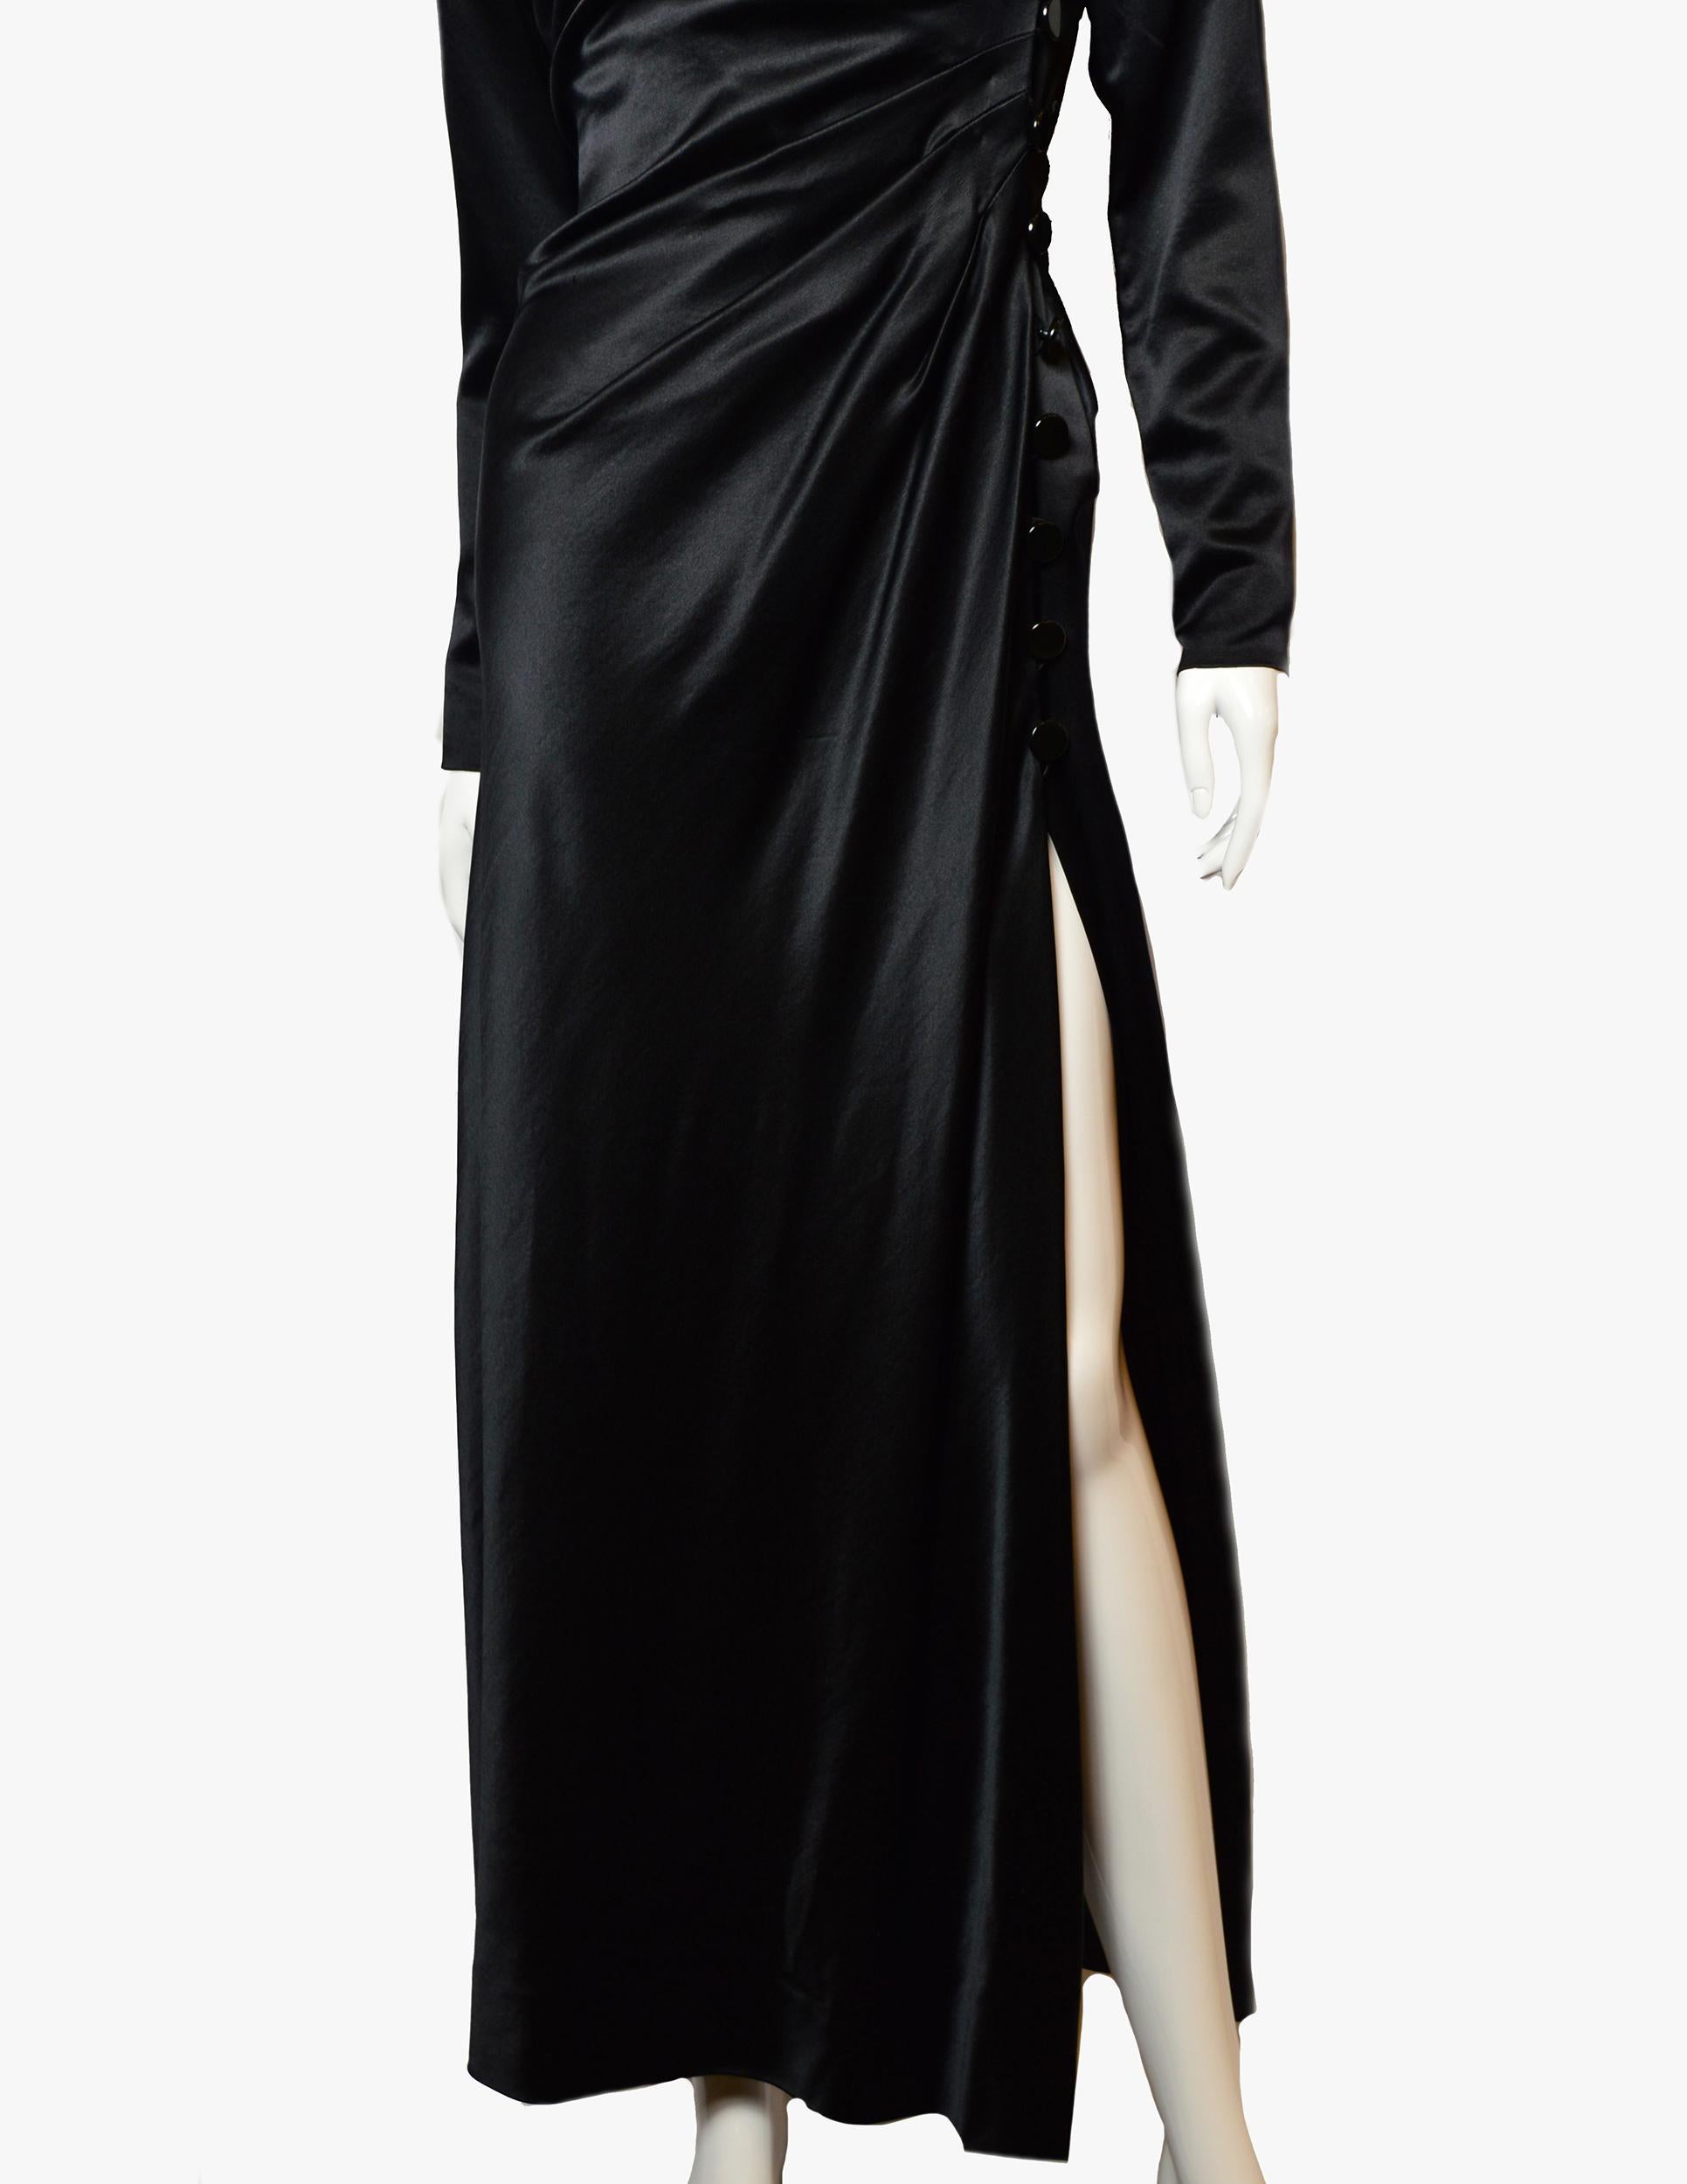 Vintage Yves Saint Laurent Evening Silk Black Dress, 1987 In Good Condition For Sale In New York, NY